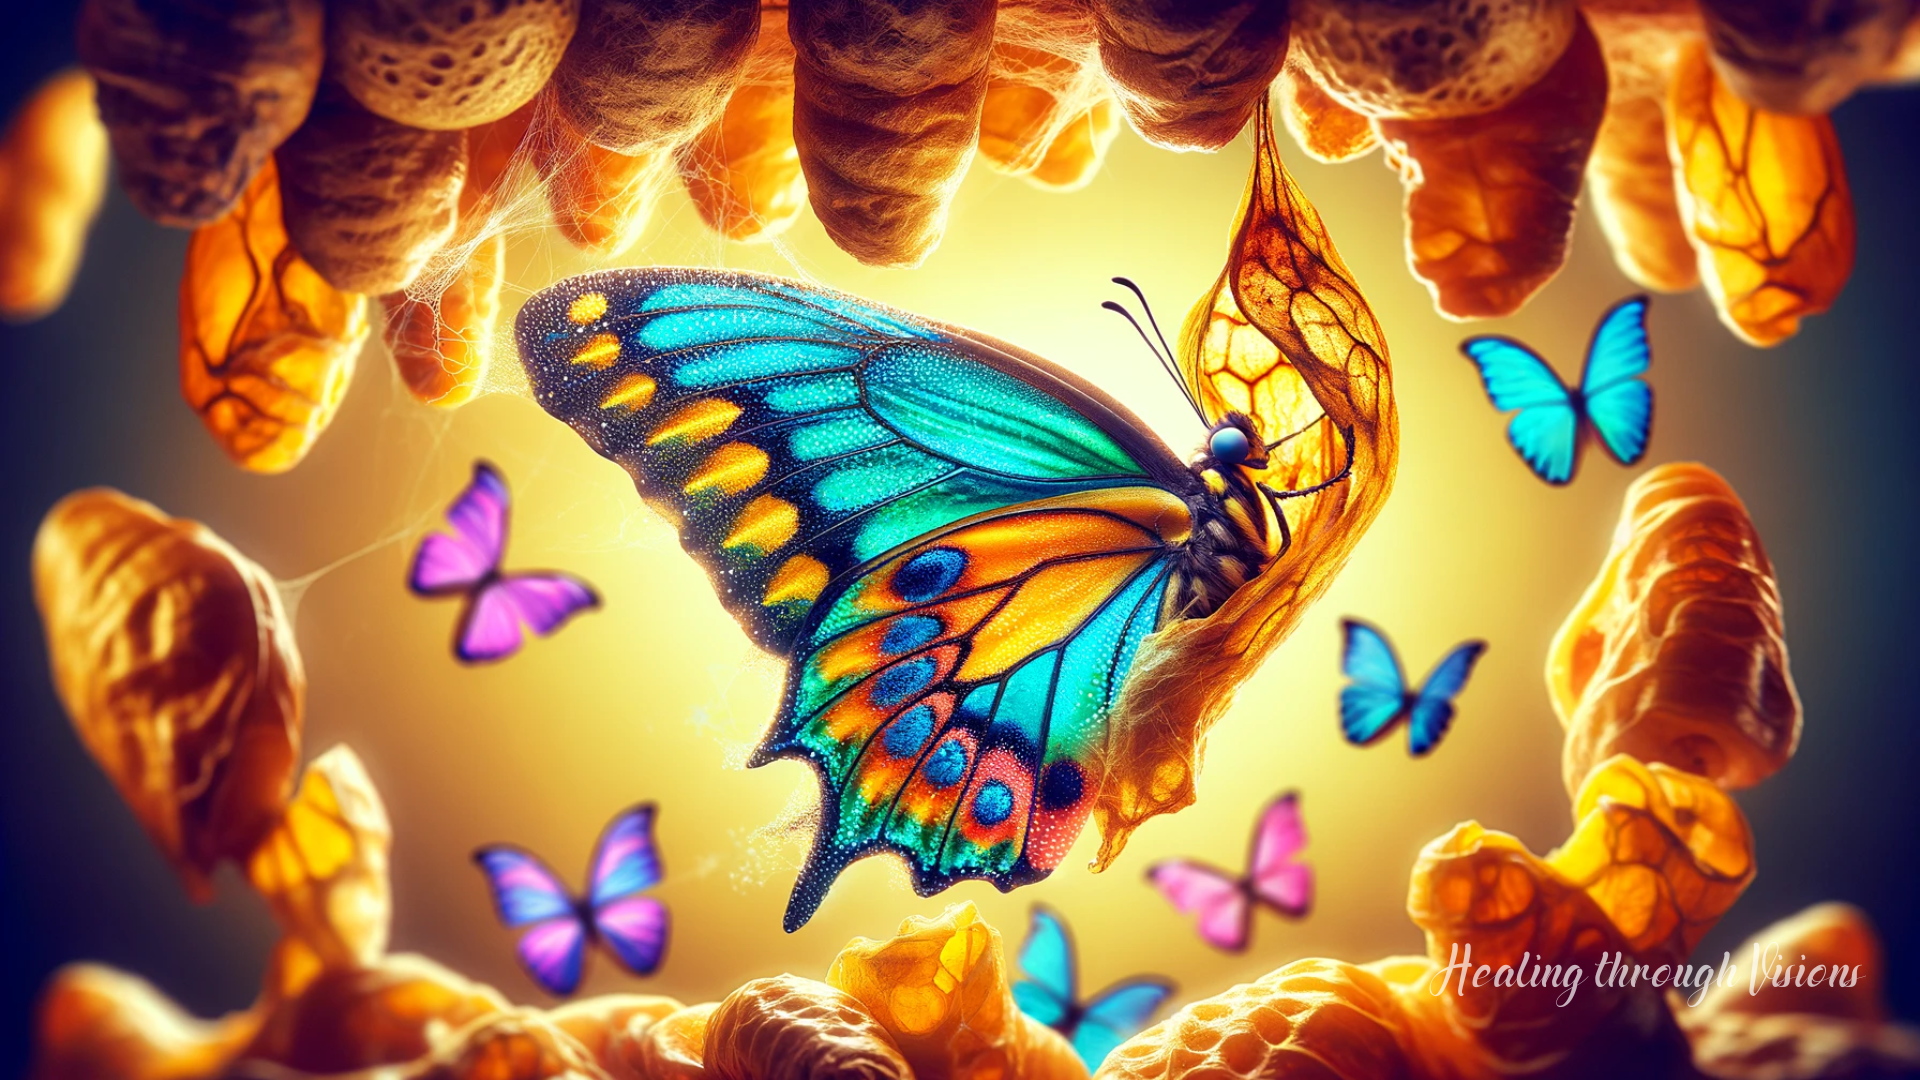 A vibrant image of a butterfly emerging from its cocoon, captured in high-definition. The photograph illustrates the moment of transformation and emergence, showcasing the butterfly's vivid colors and the remnants of the cocoon. This image symbolizes transformation and the beauty of new beginnings.